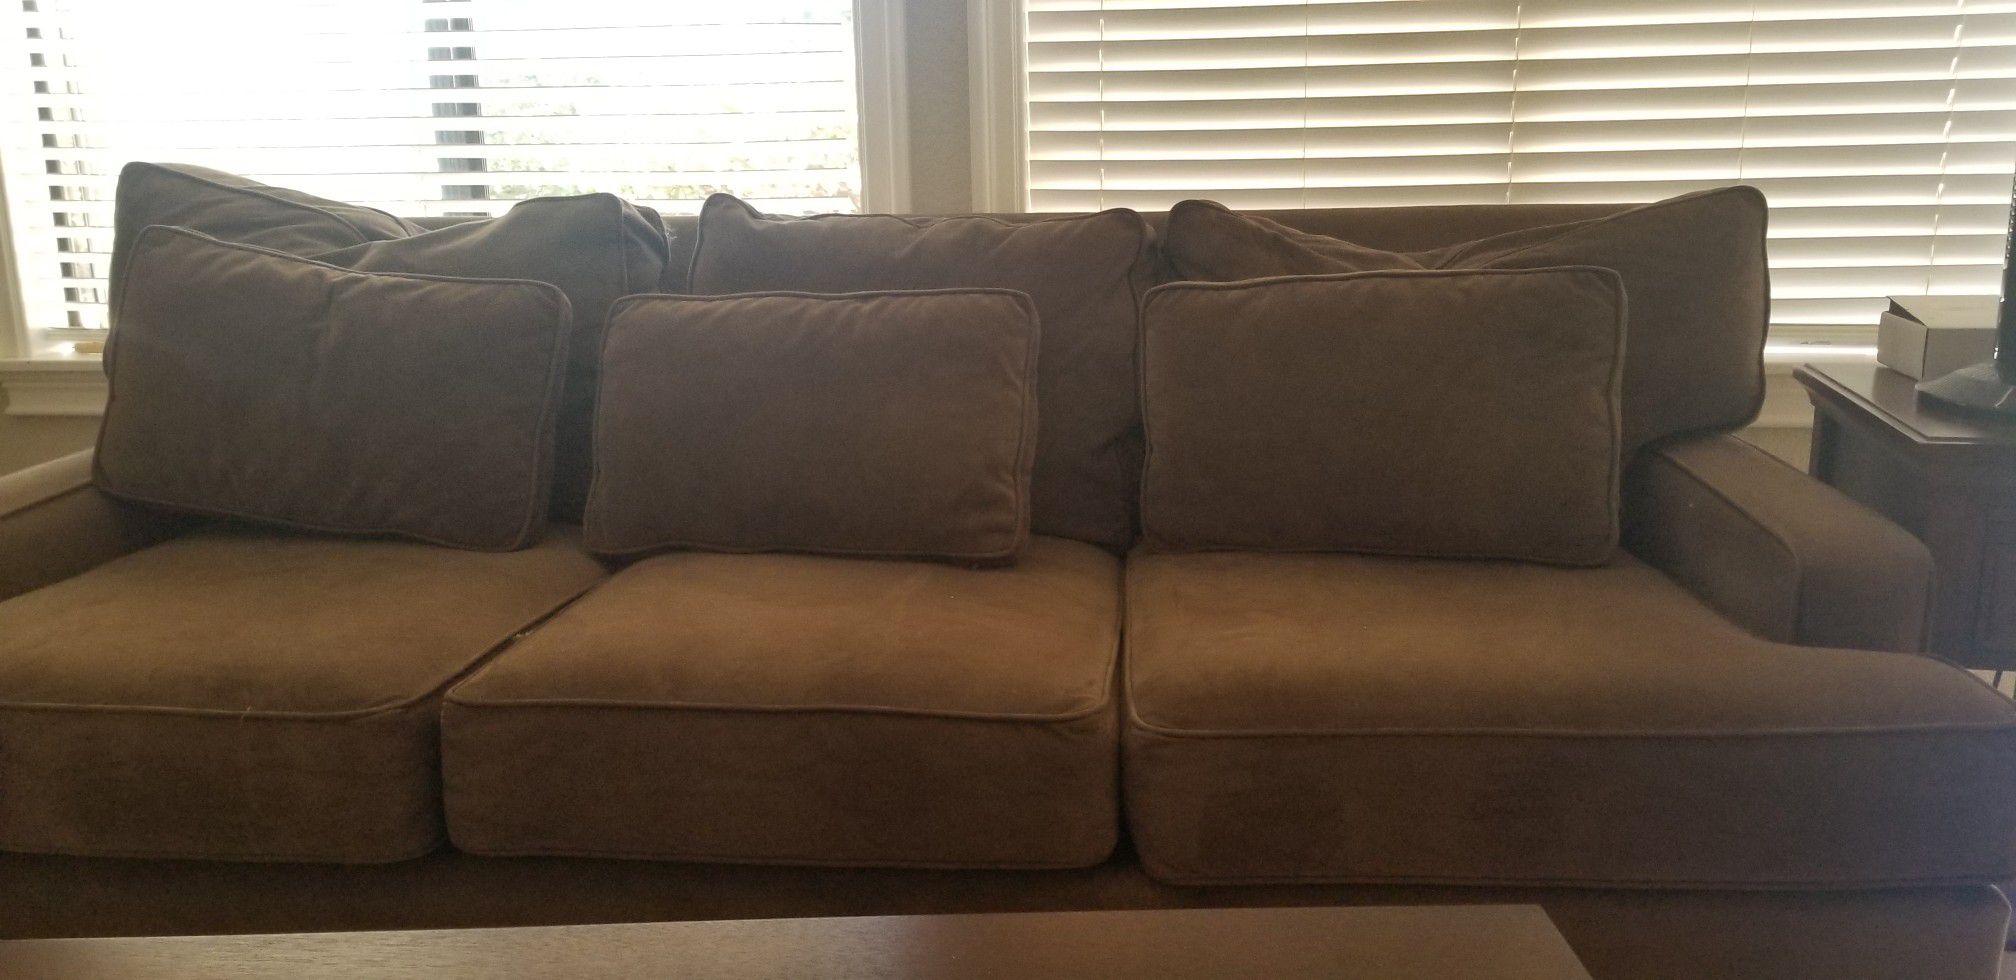 Sofa sleeper and chairs. Delivery included!